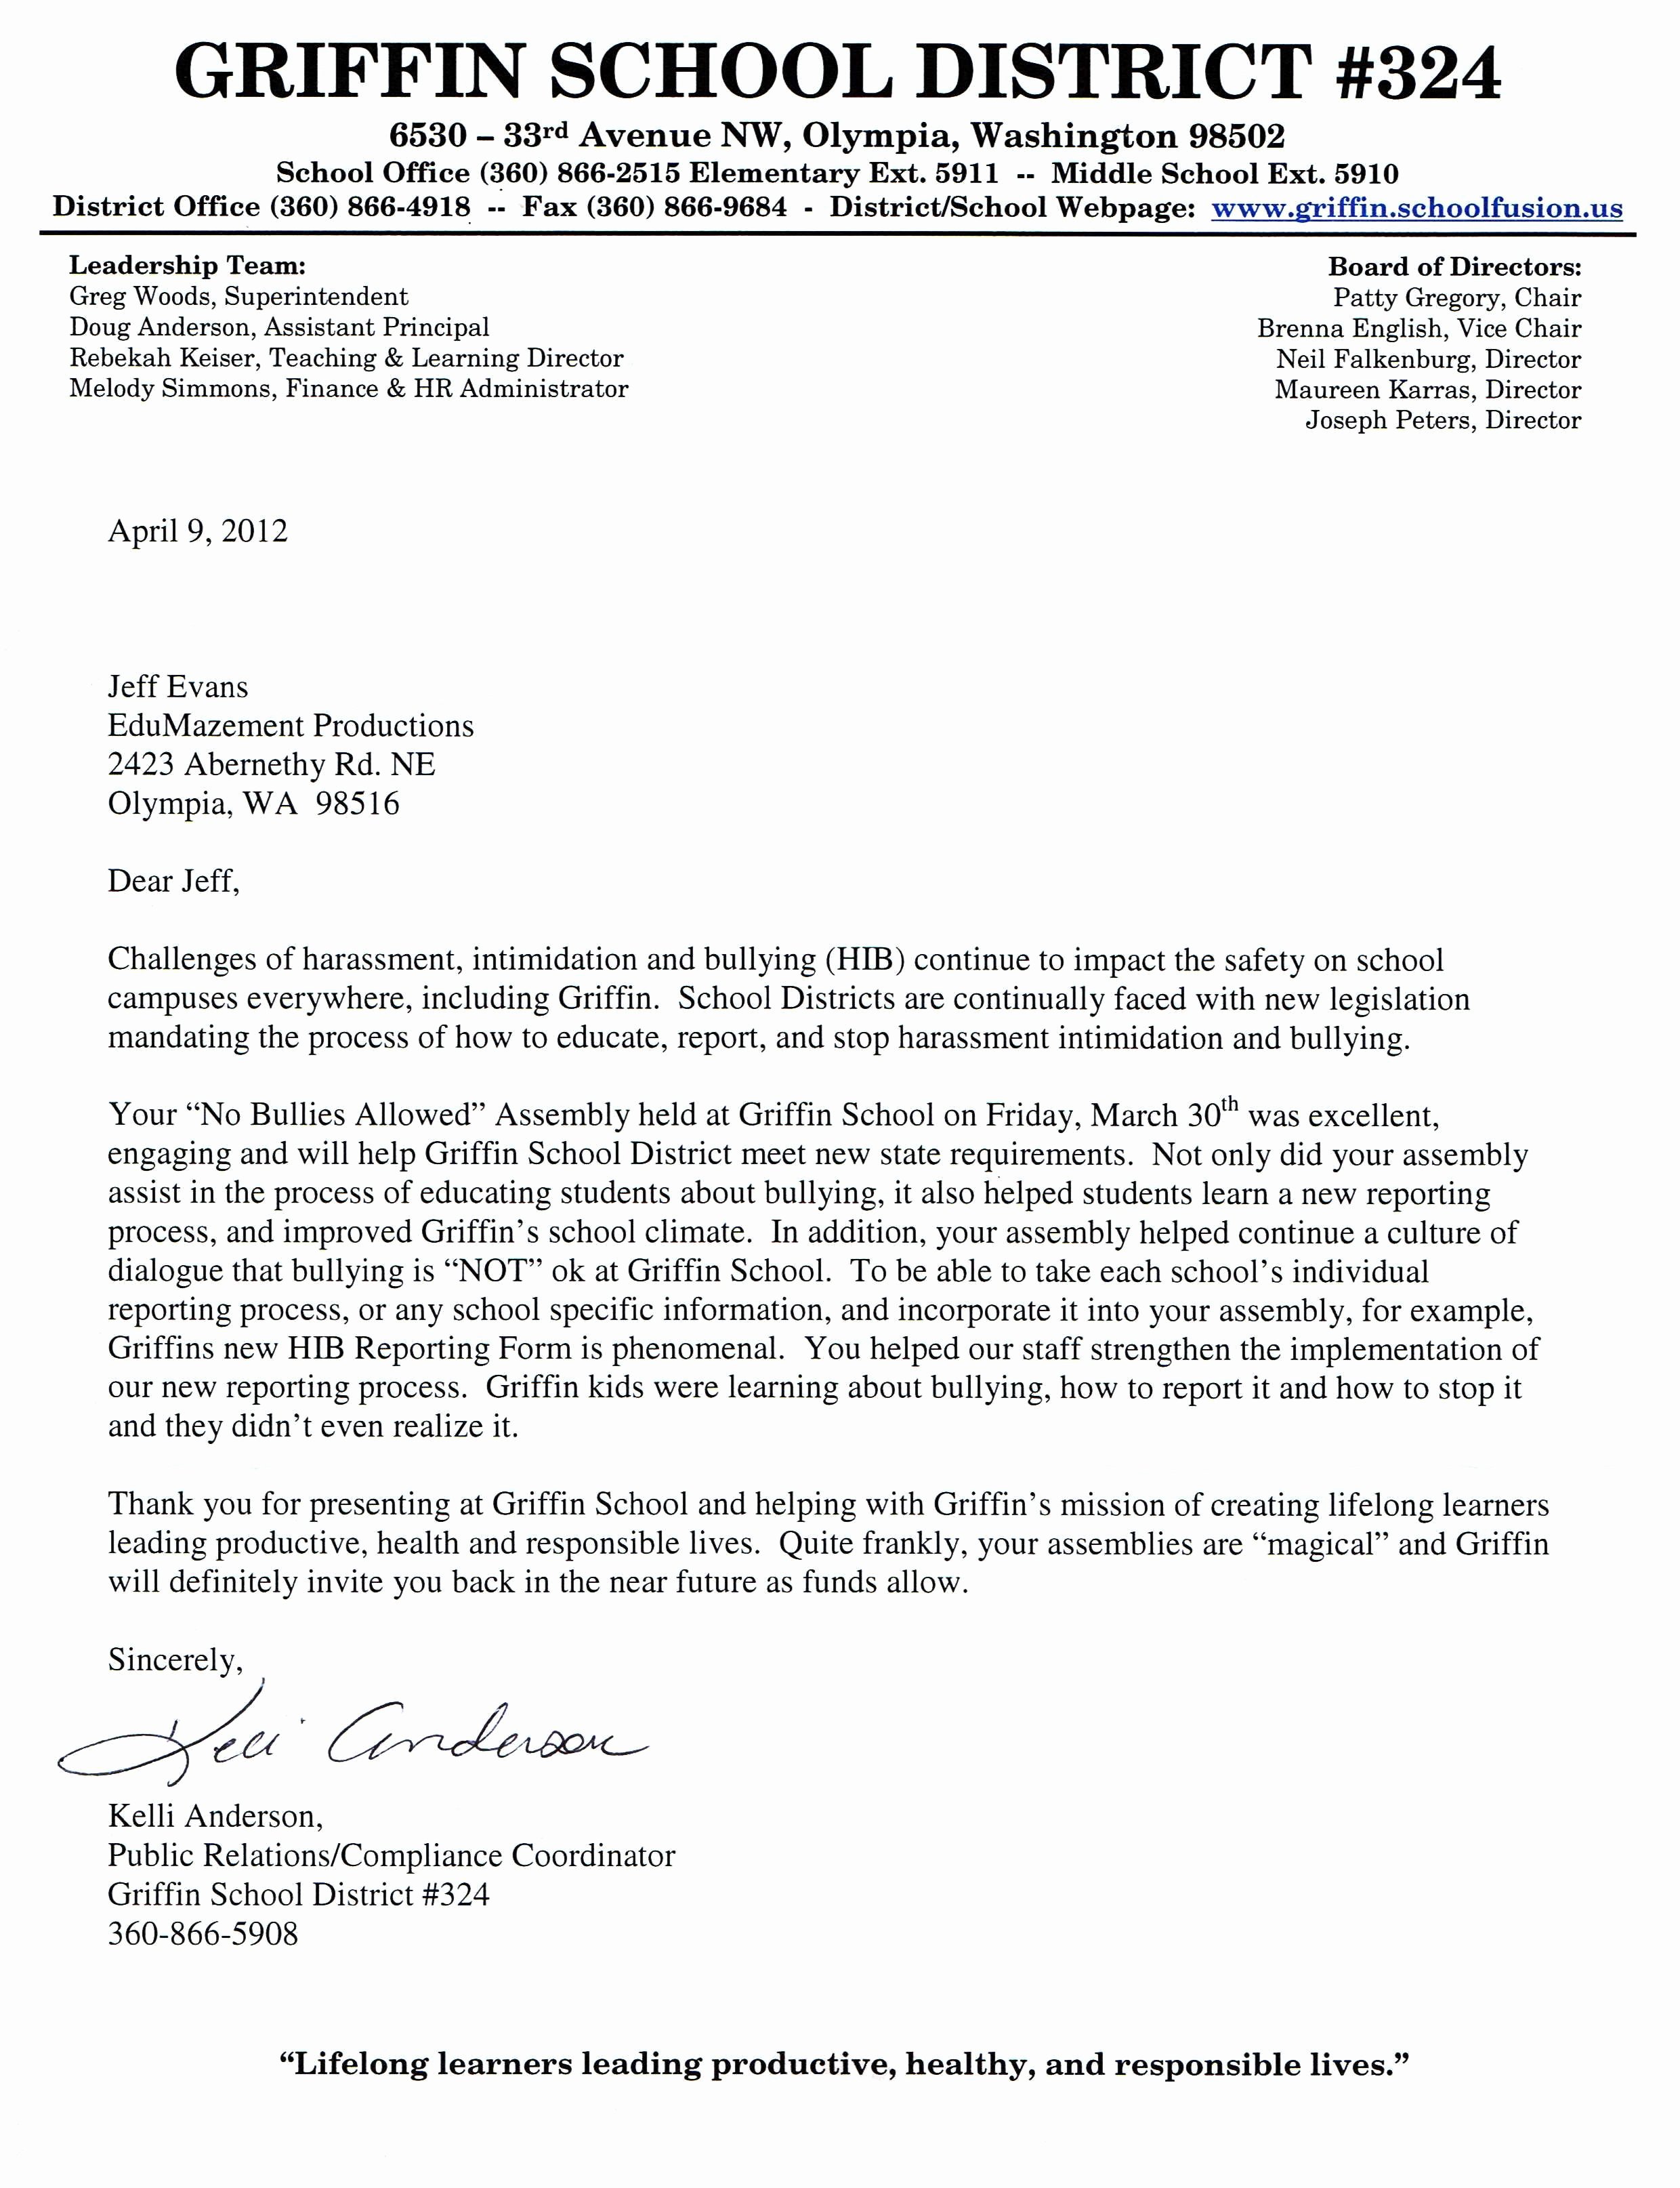 Faa Letter Of Recommendation Sample Inspirational Letter Of Re Mendation From the Griffin School District